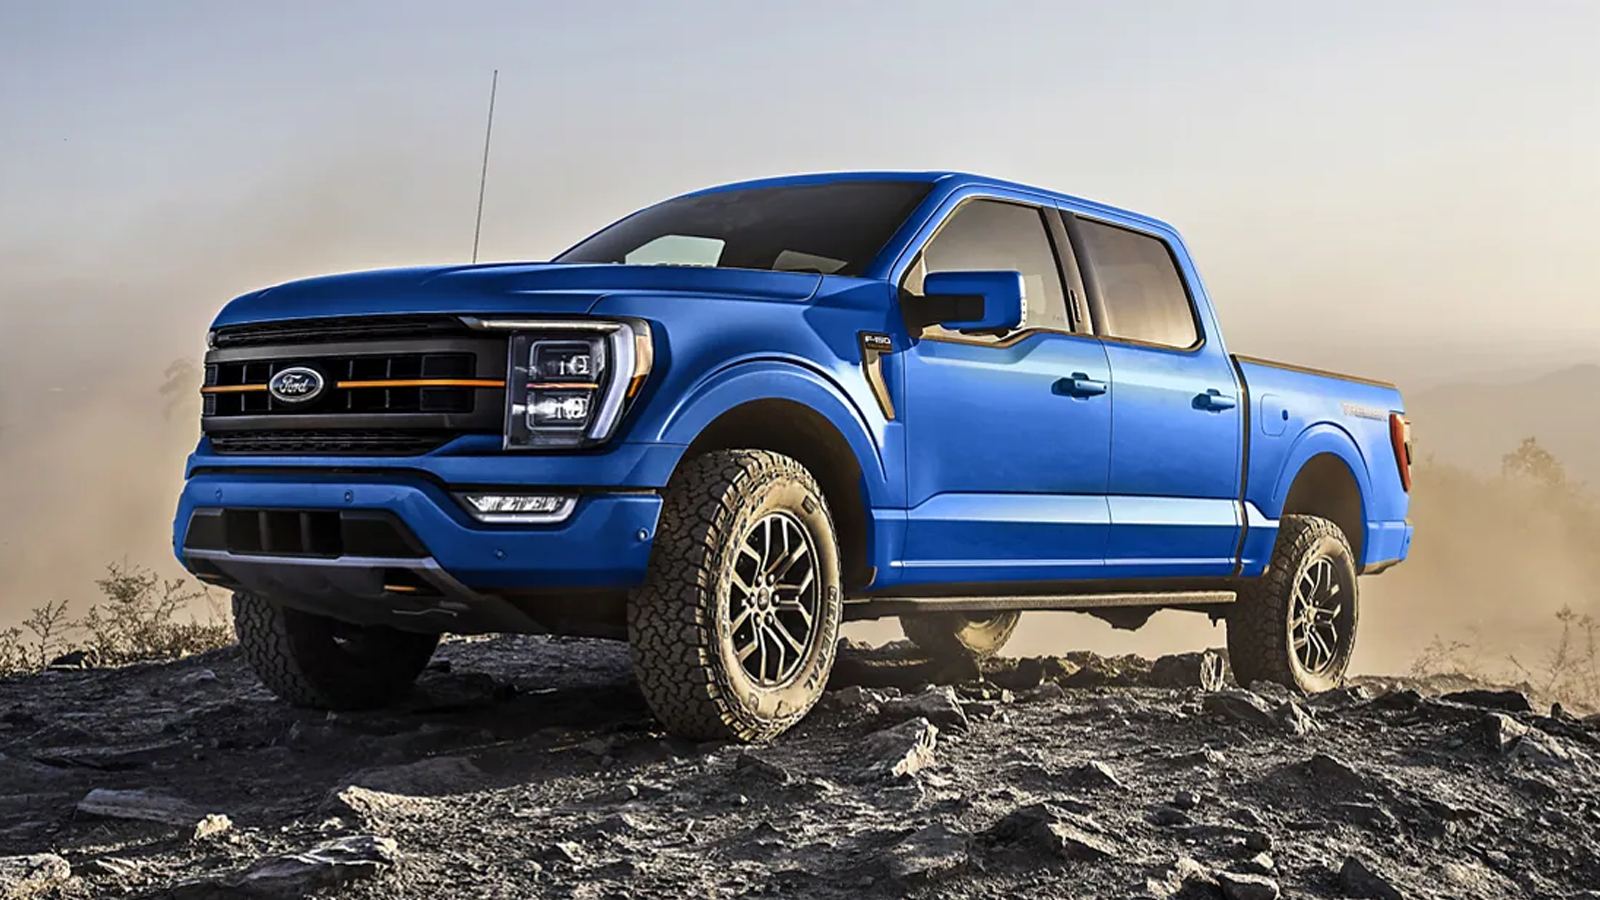 The Manly Stereotypes of Owning a Ford Truck | Ford-trucks